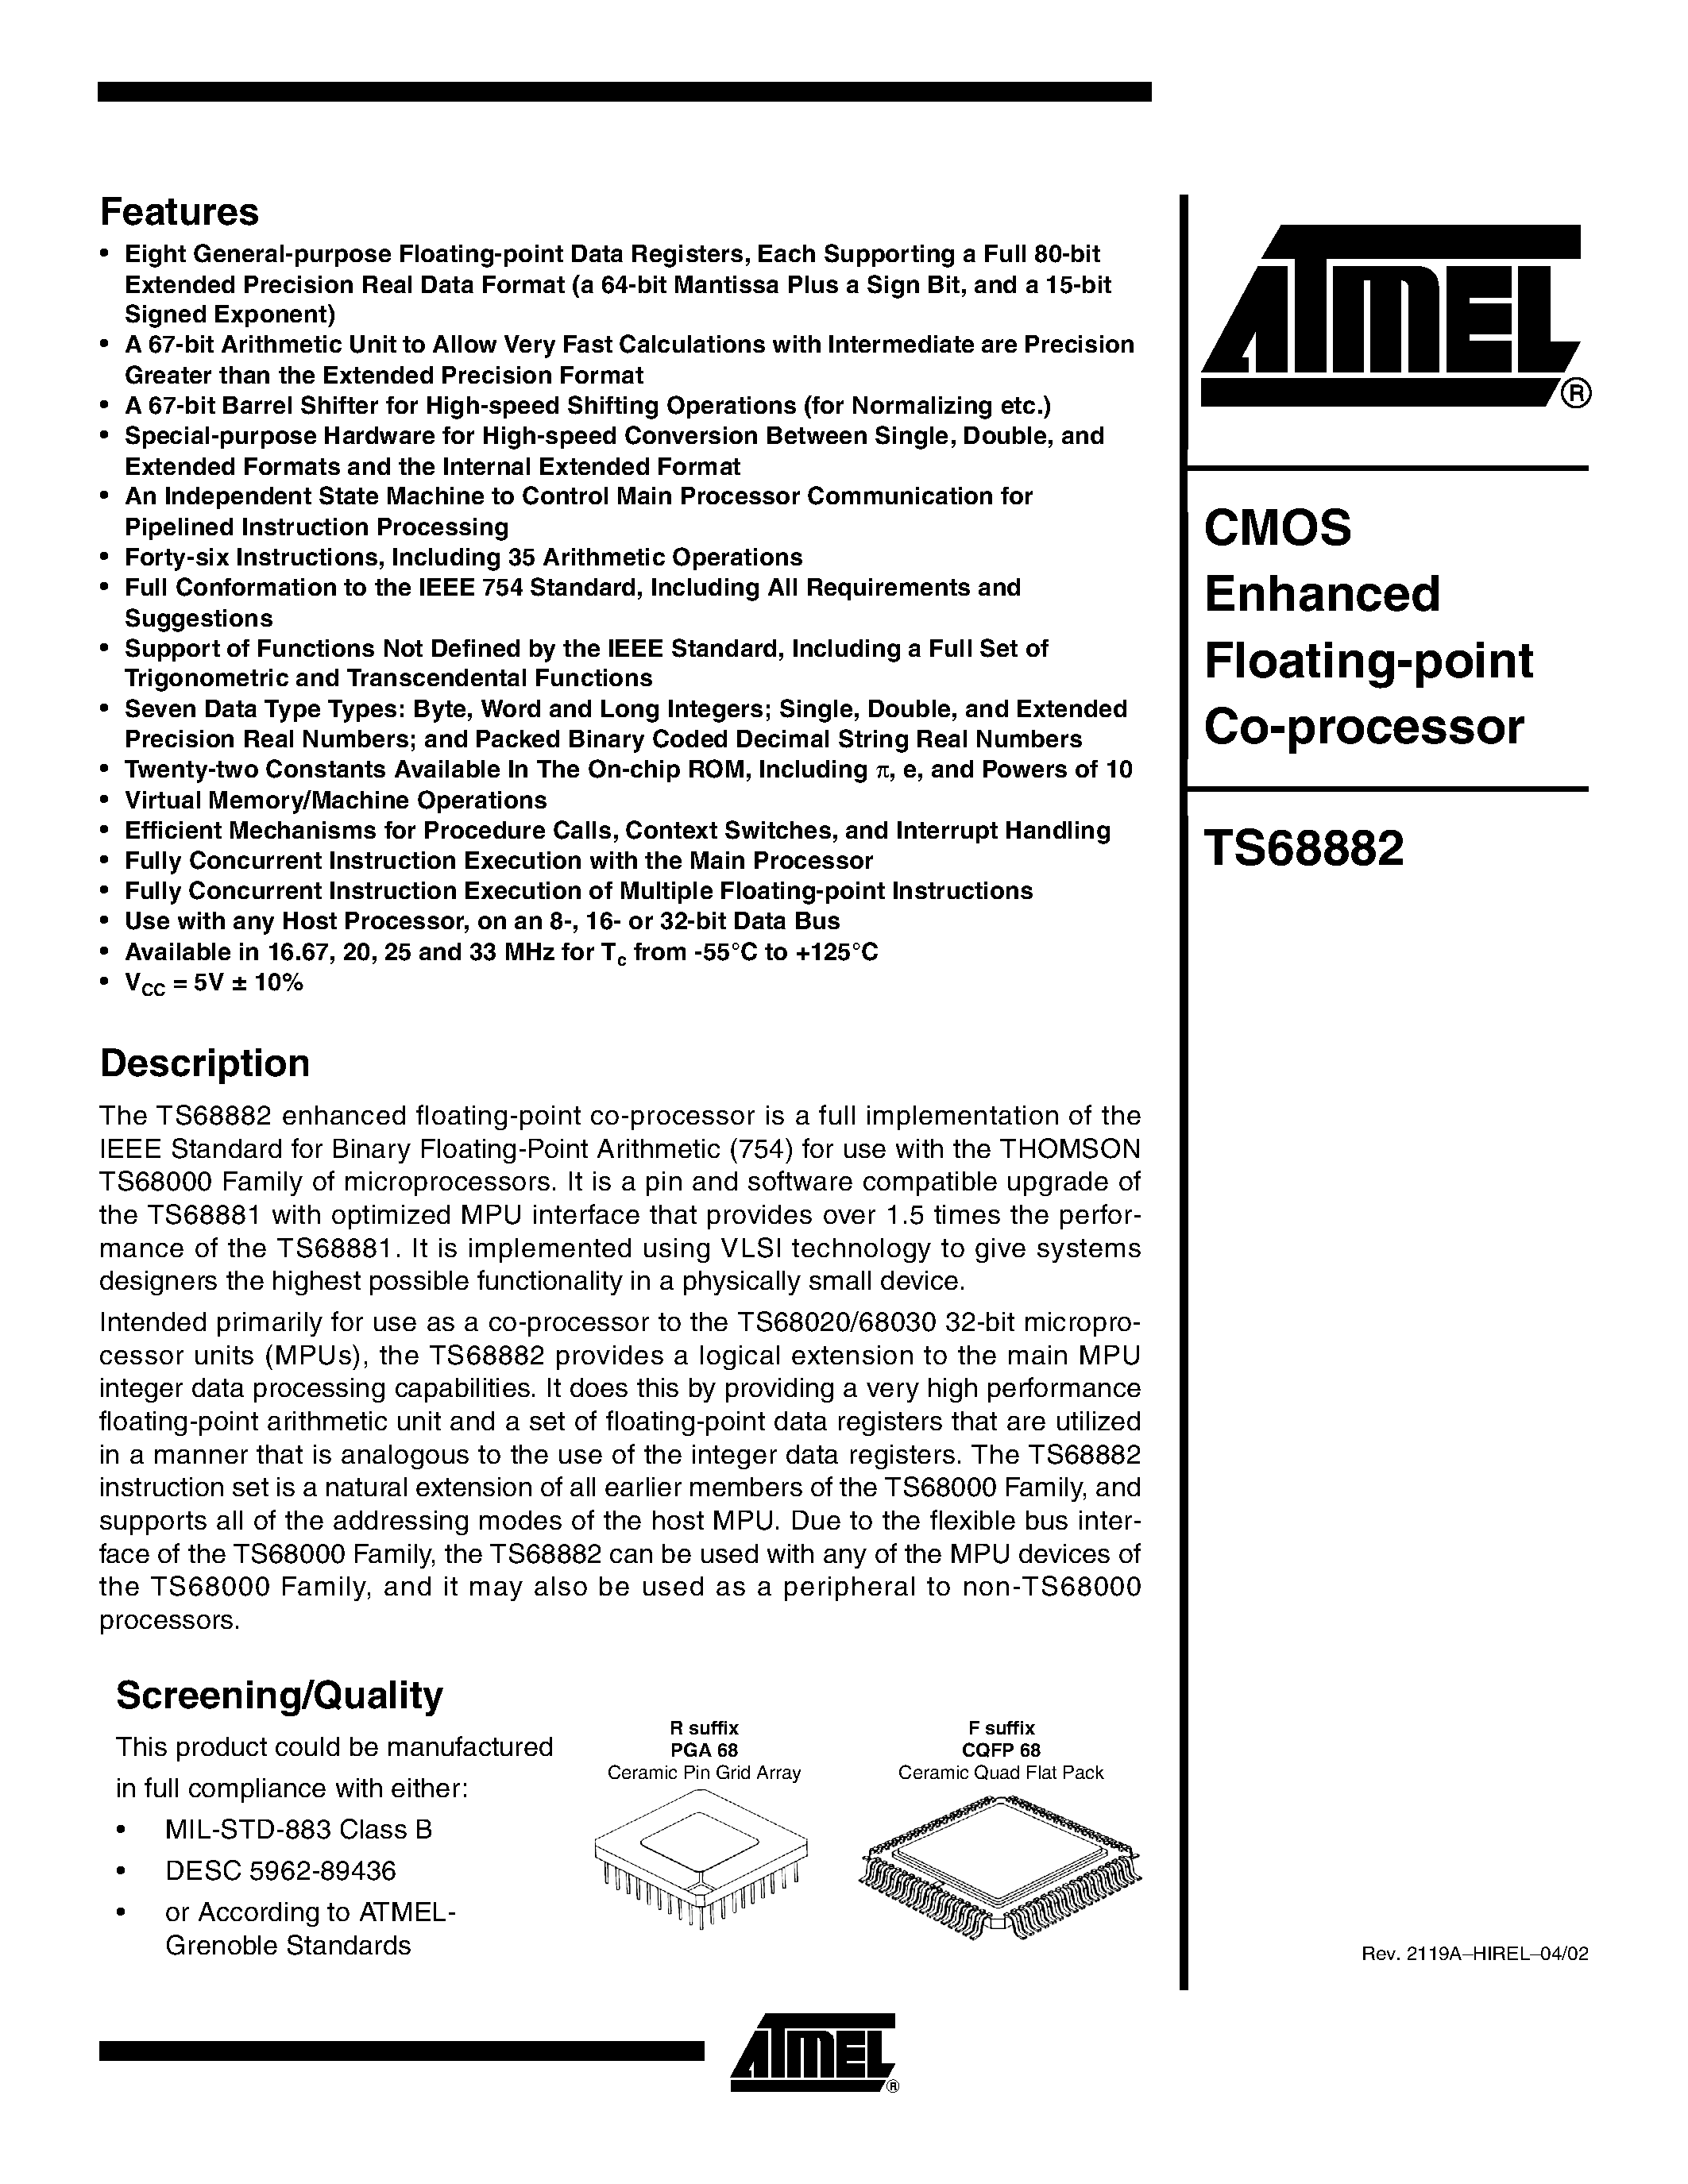 Datasheet TS68882VR20 - CMOS Enhanced Floating-point Co-processor page 1